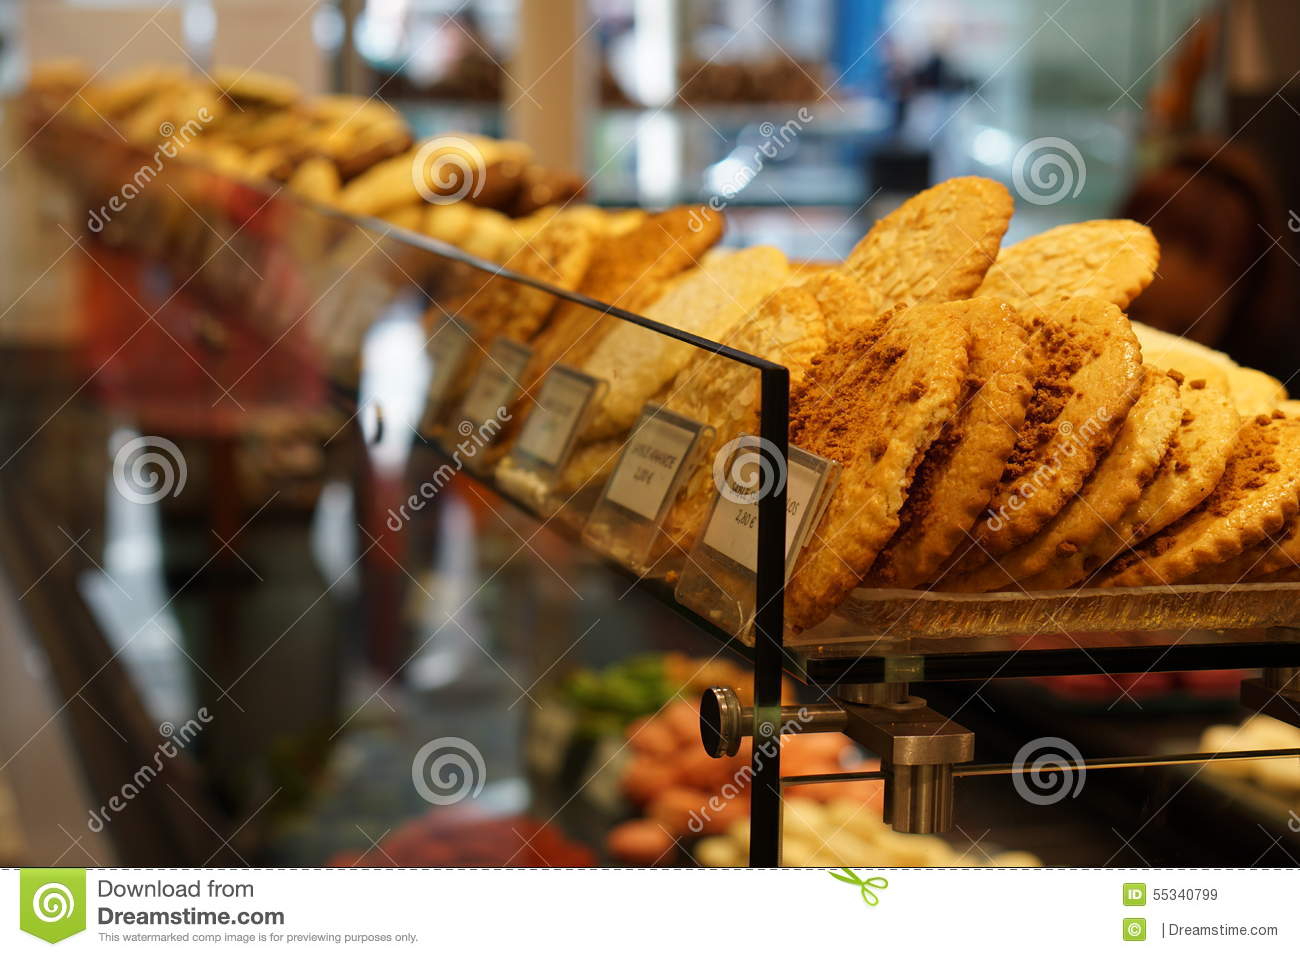 Sweets In A Bakery Stock Photo   Image  55340799